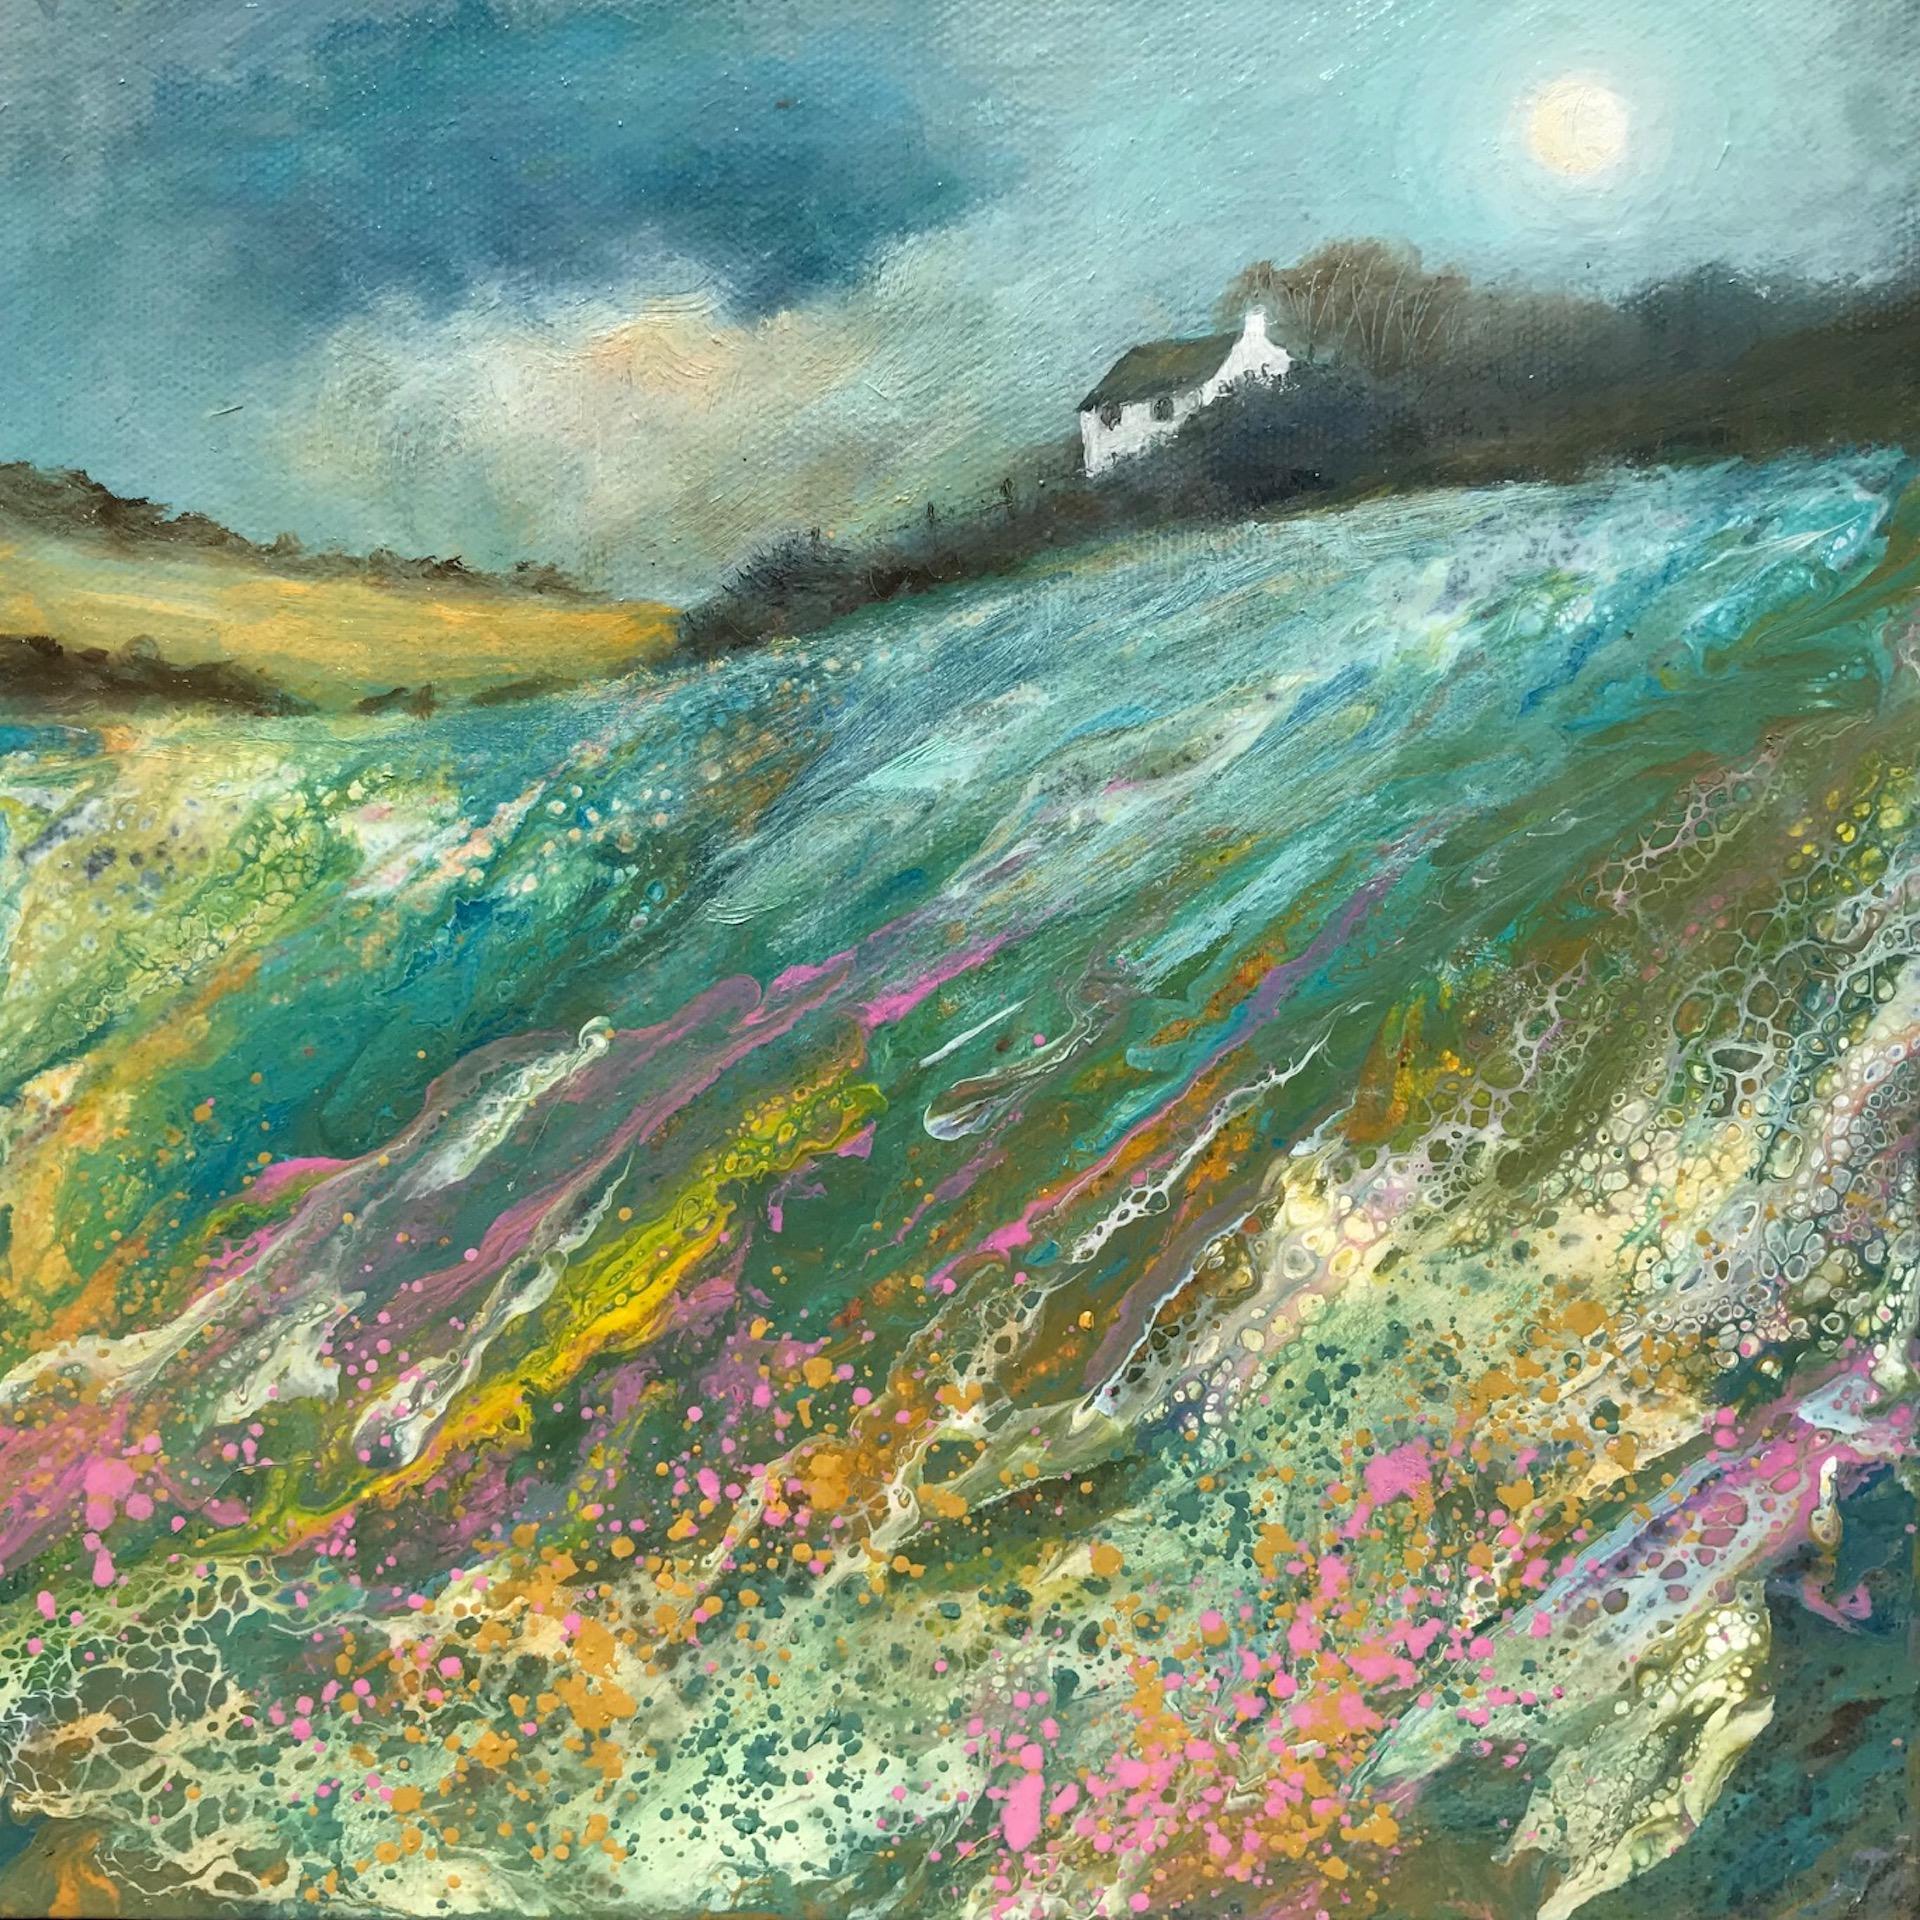 Cathryn Jeff
Pastel Meadow
Original Mixed Media Painting on Deep Canvas
Canvas Size: 25 cm x 25 cm x 3.5 cm
Sold Unframed
Free Shipping

Please note that in situ images are purely an indication of how a piece may look.

Pastel Meadow is an original